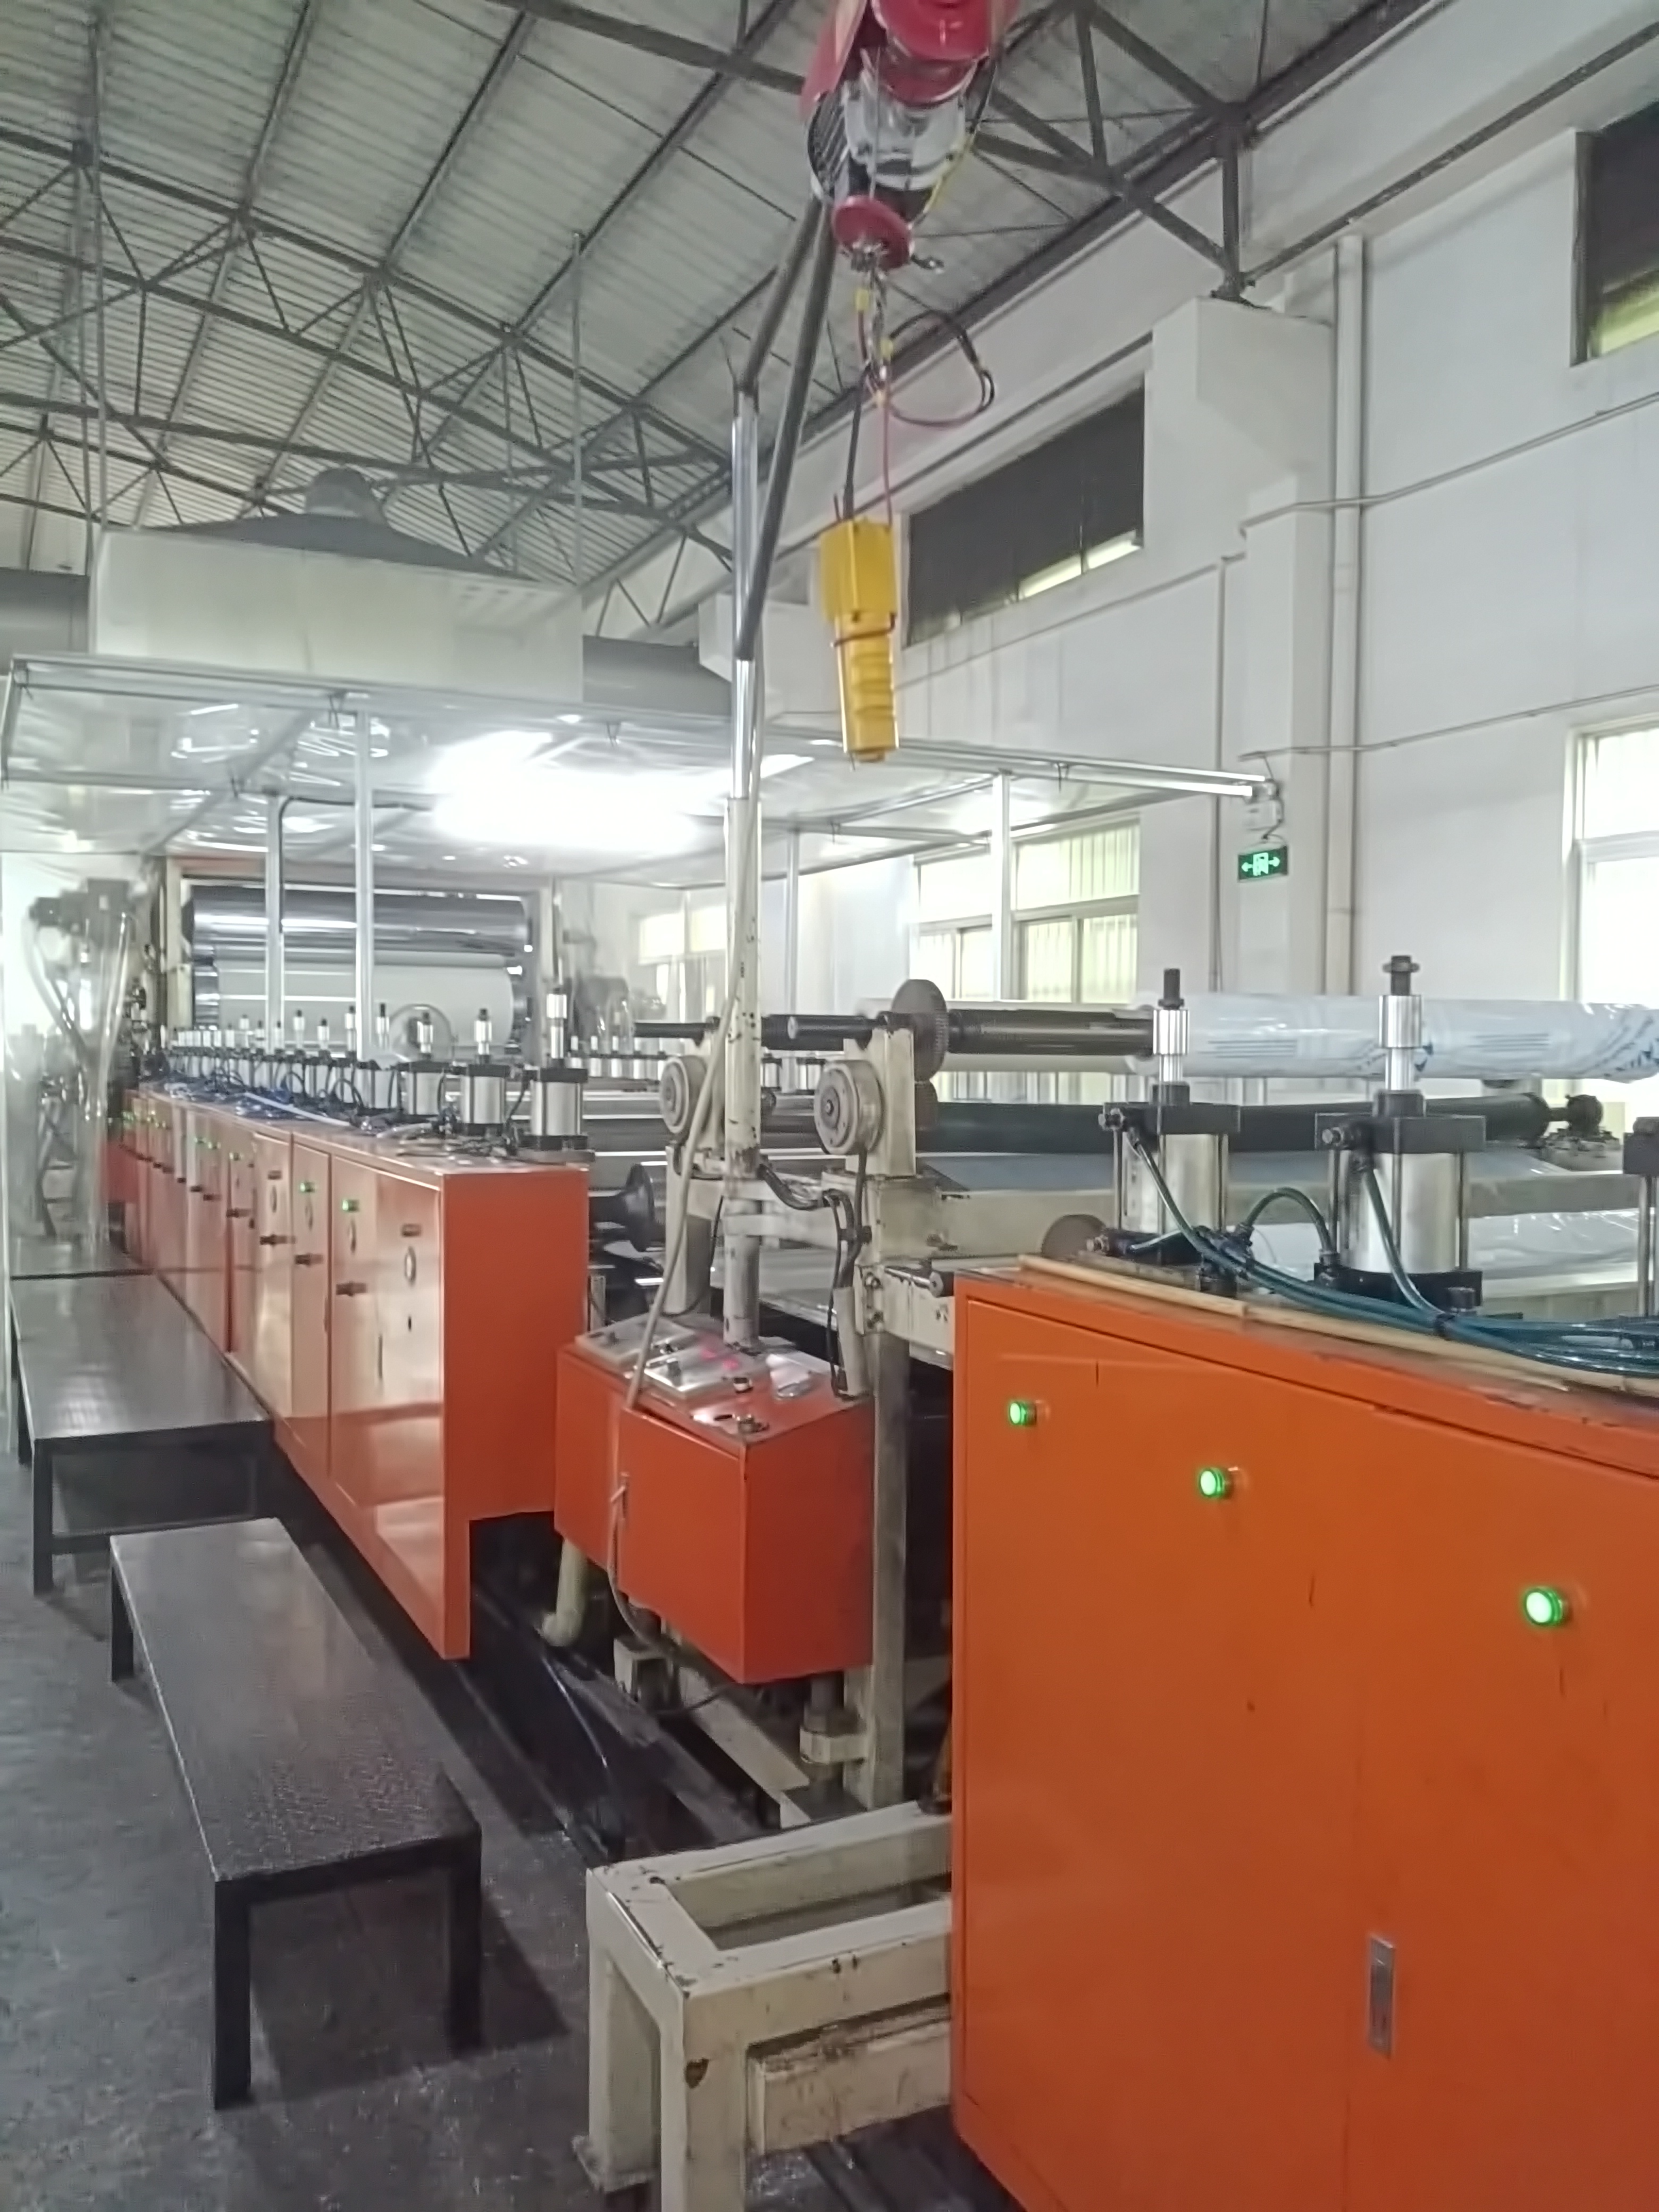 PP厚板挤出生产线 (PP Thick Plate Extrusion Line)